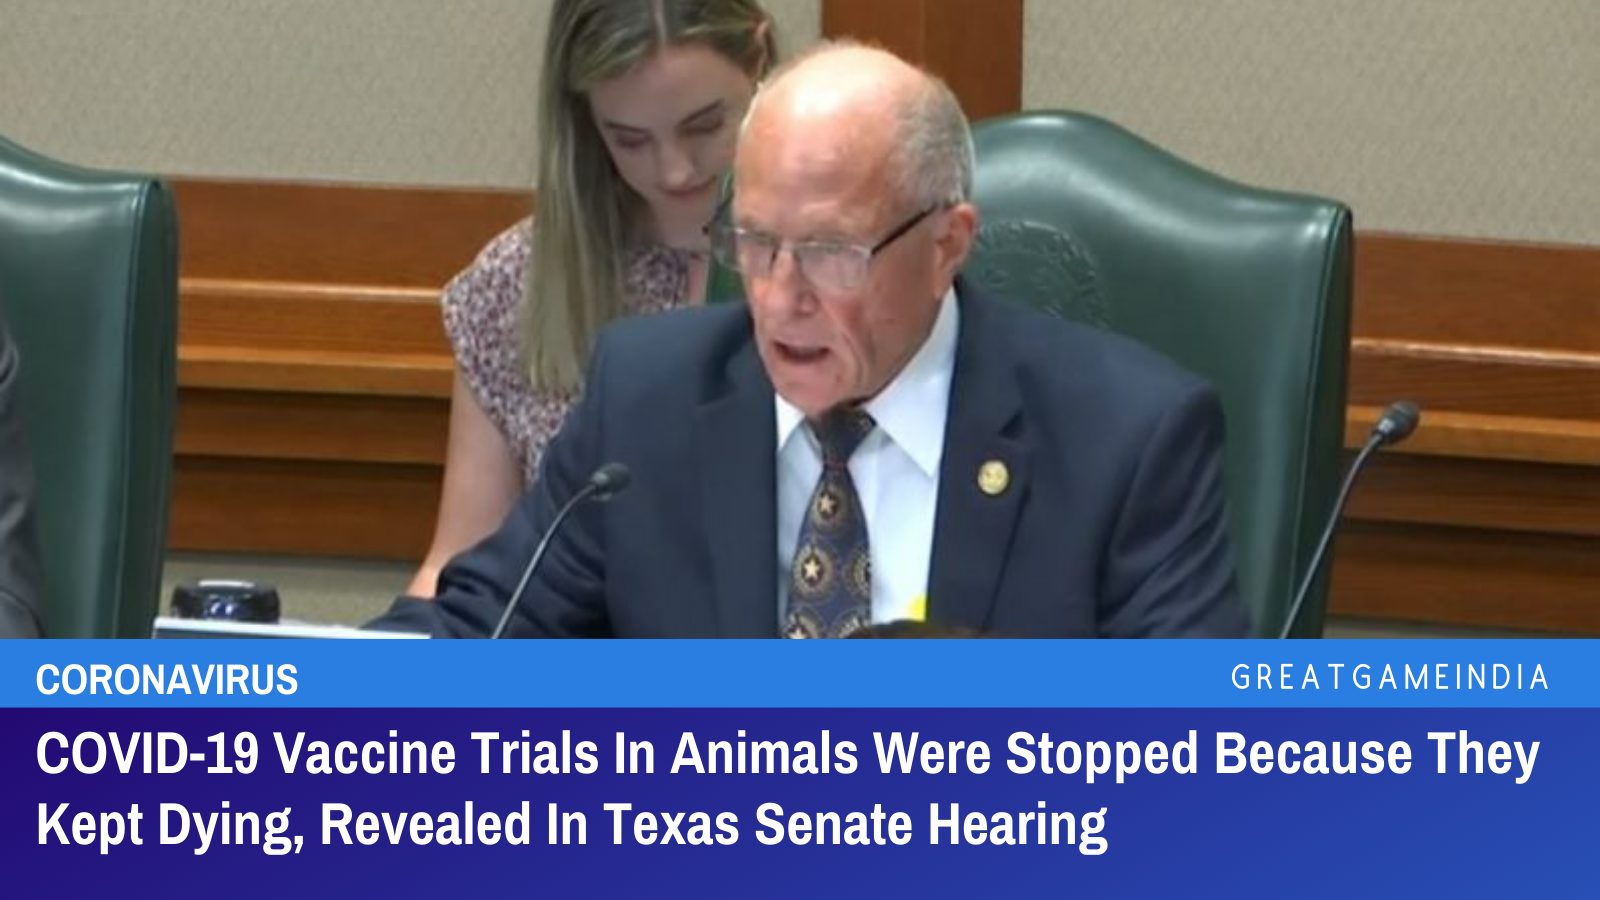 COVID Vaccine Trials In Animals Were Stopped Because They Kept Dying, Revealed In Texas Senate Hearing